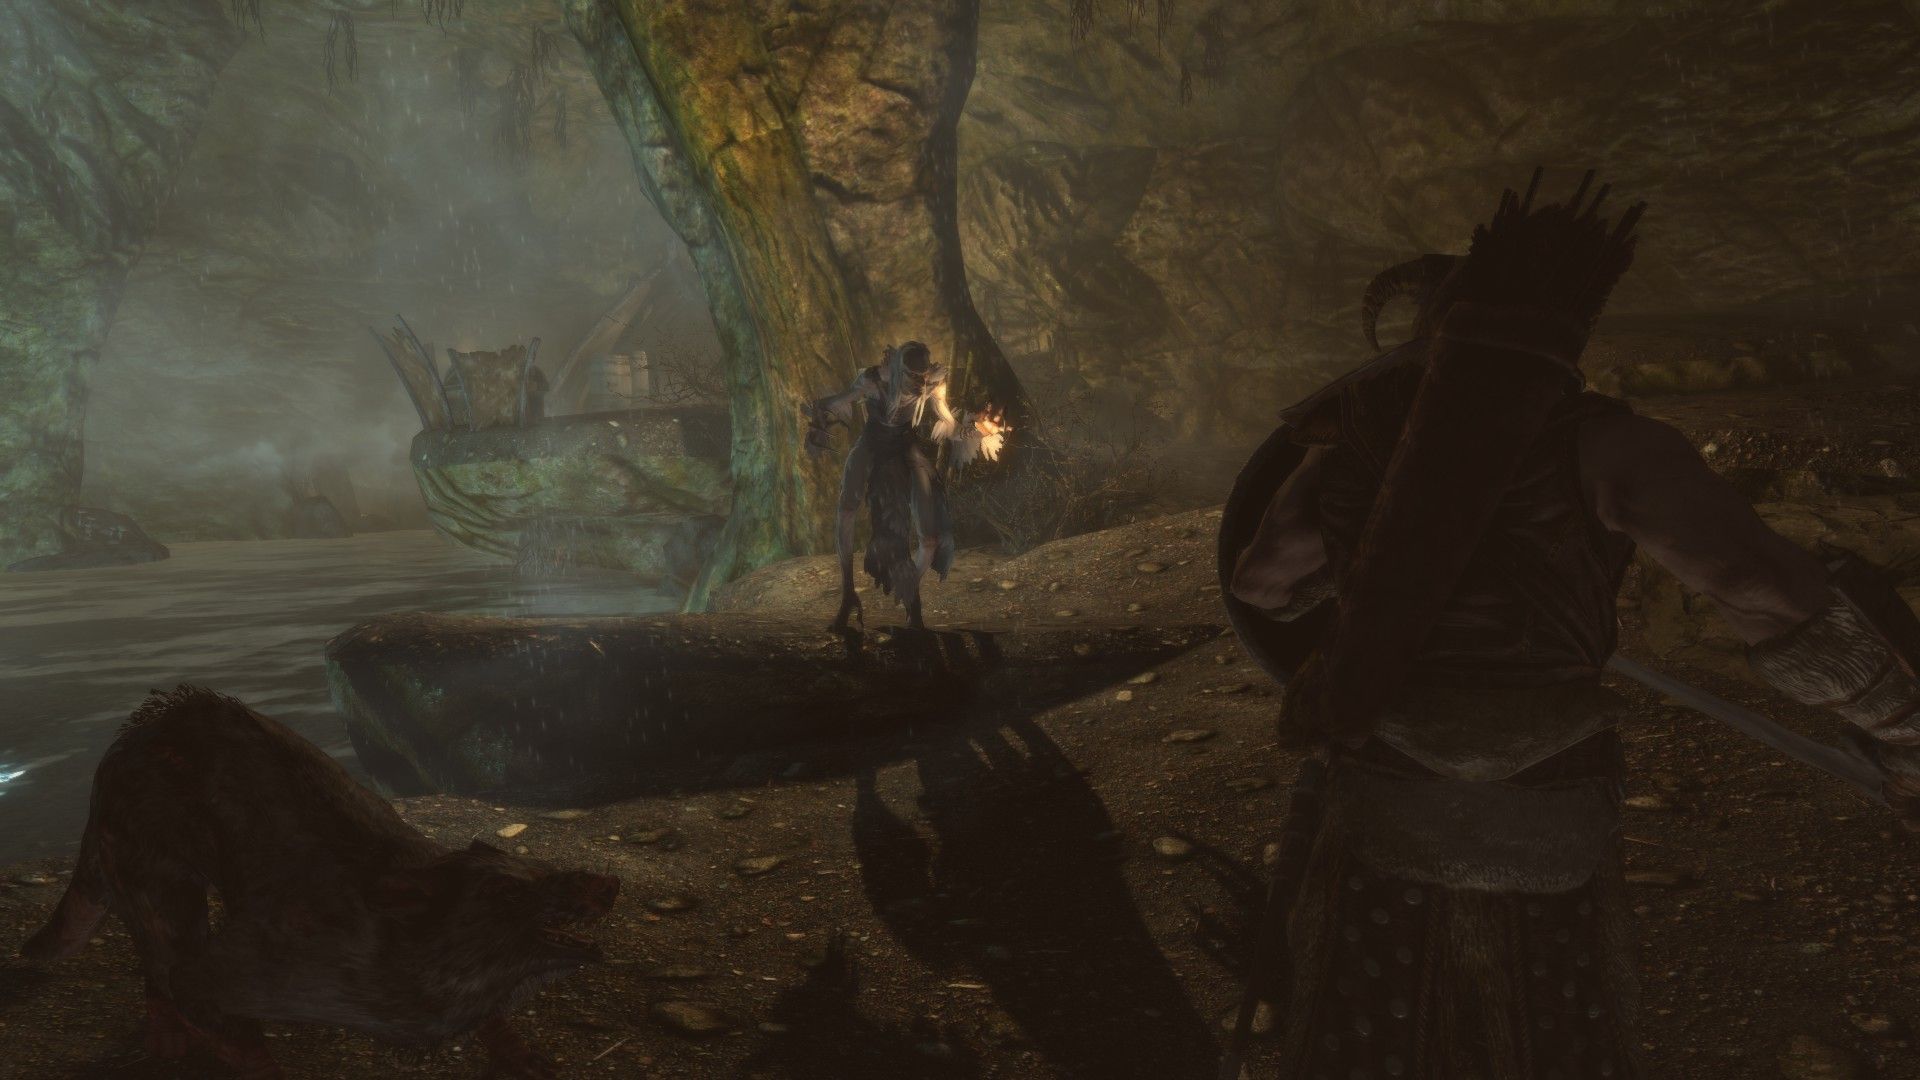 A man fights a hagraven in a cave